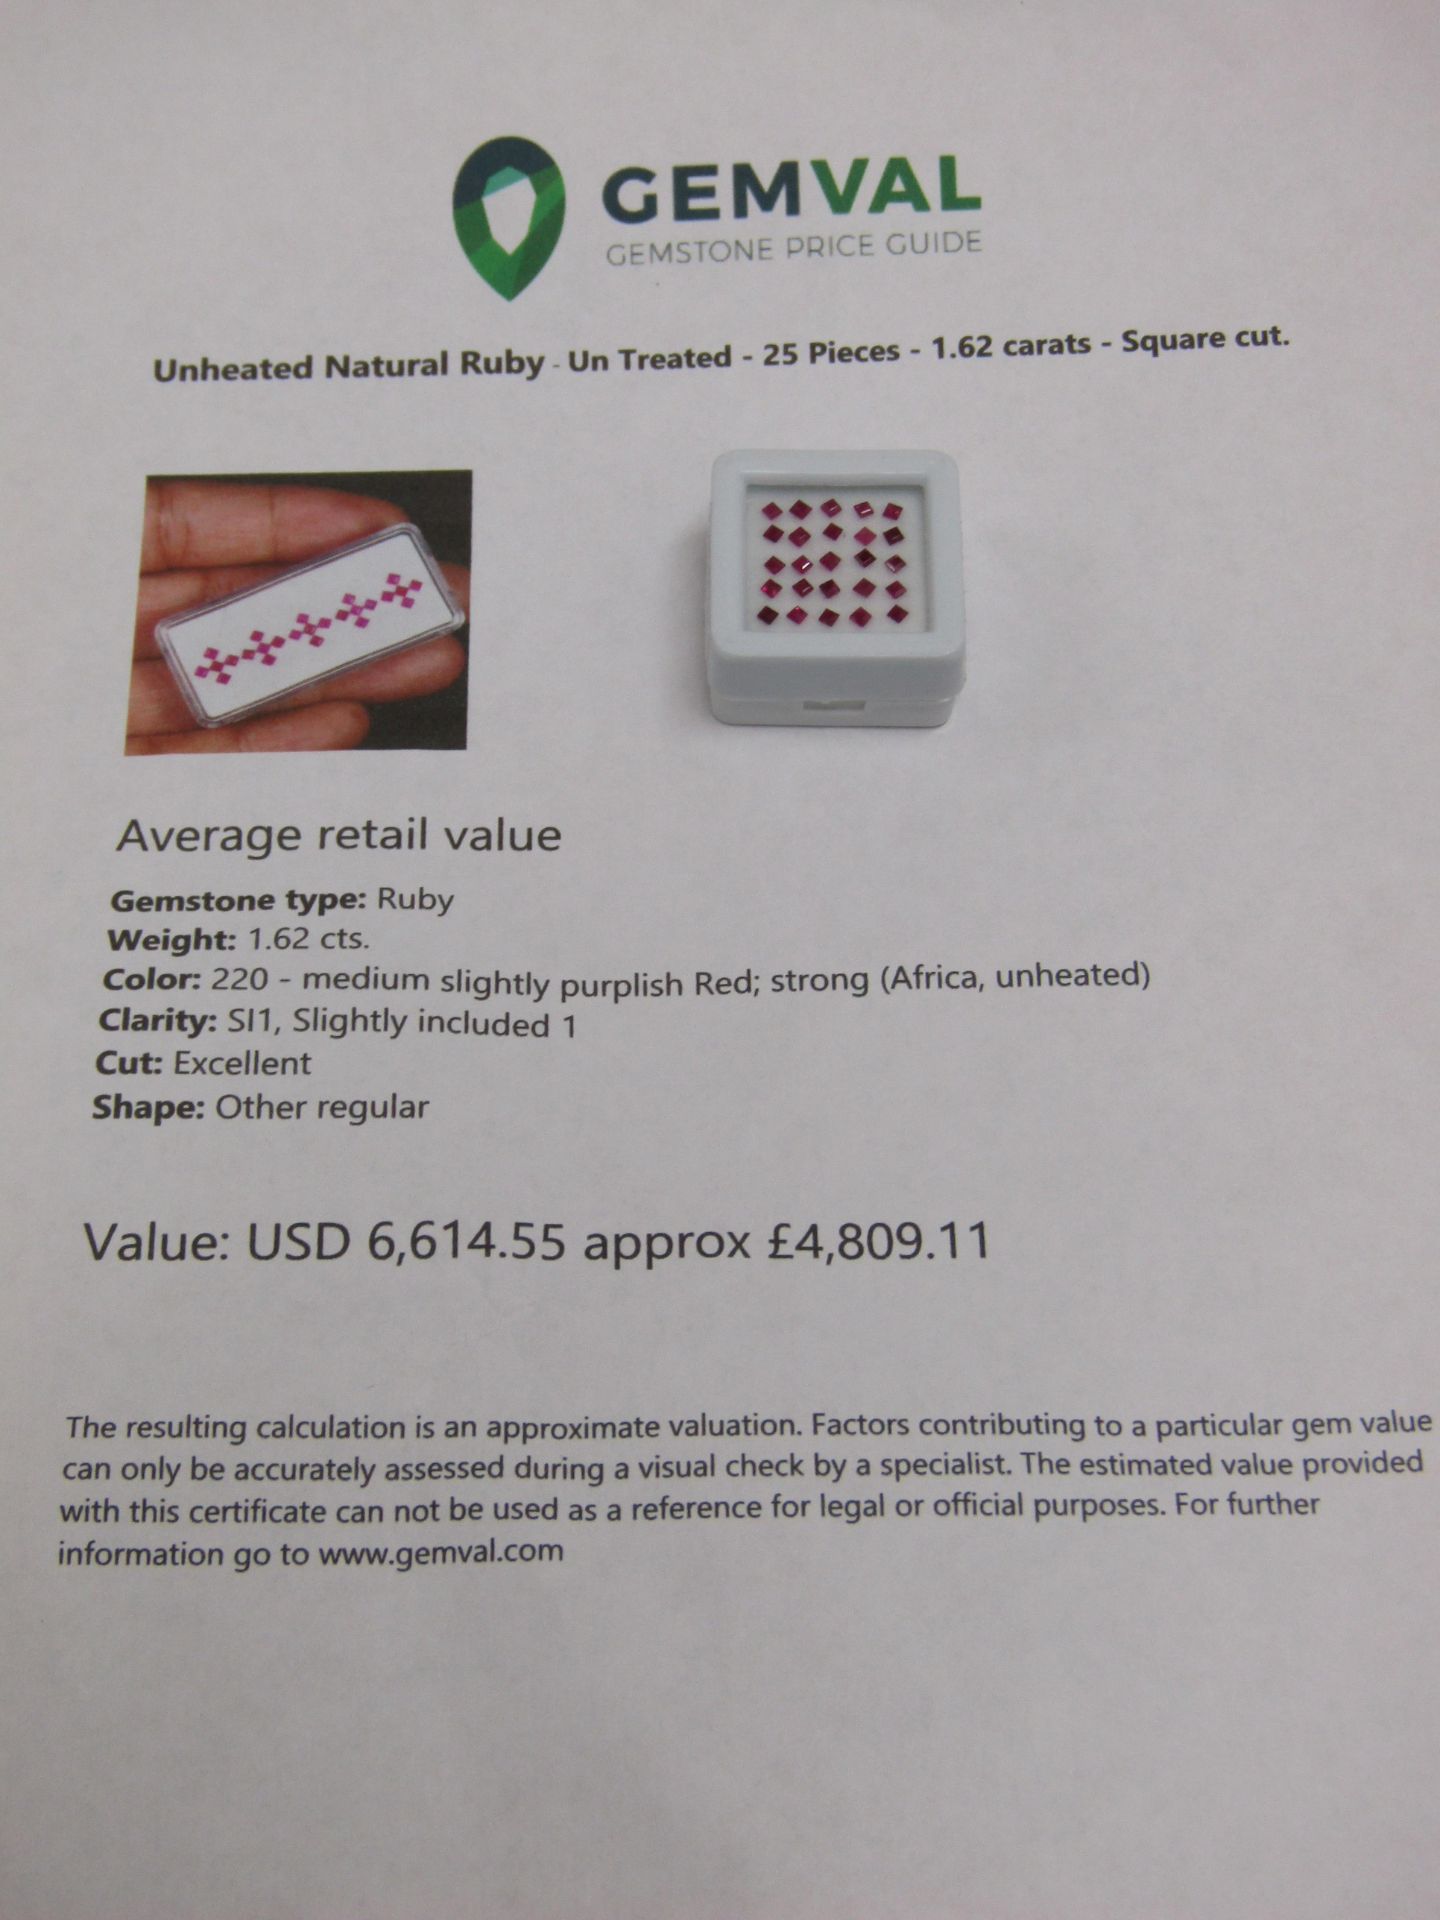 Natural Ruby - Un Treated  Unheated- 25 Pieces - 1.62 carats - Square cut. Average retail value £4,